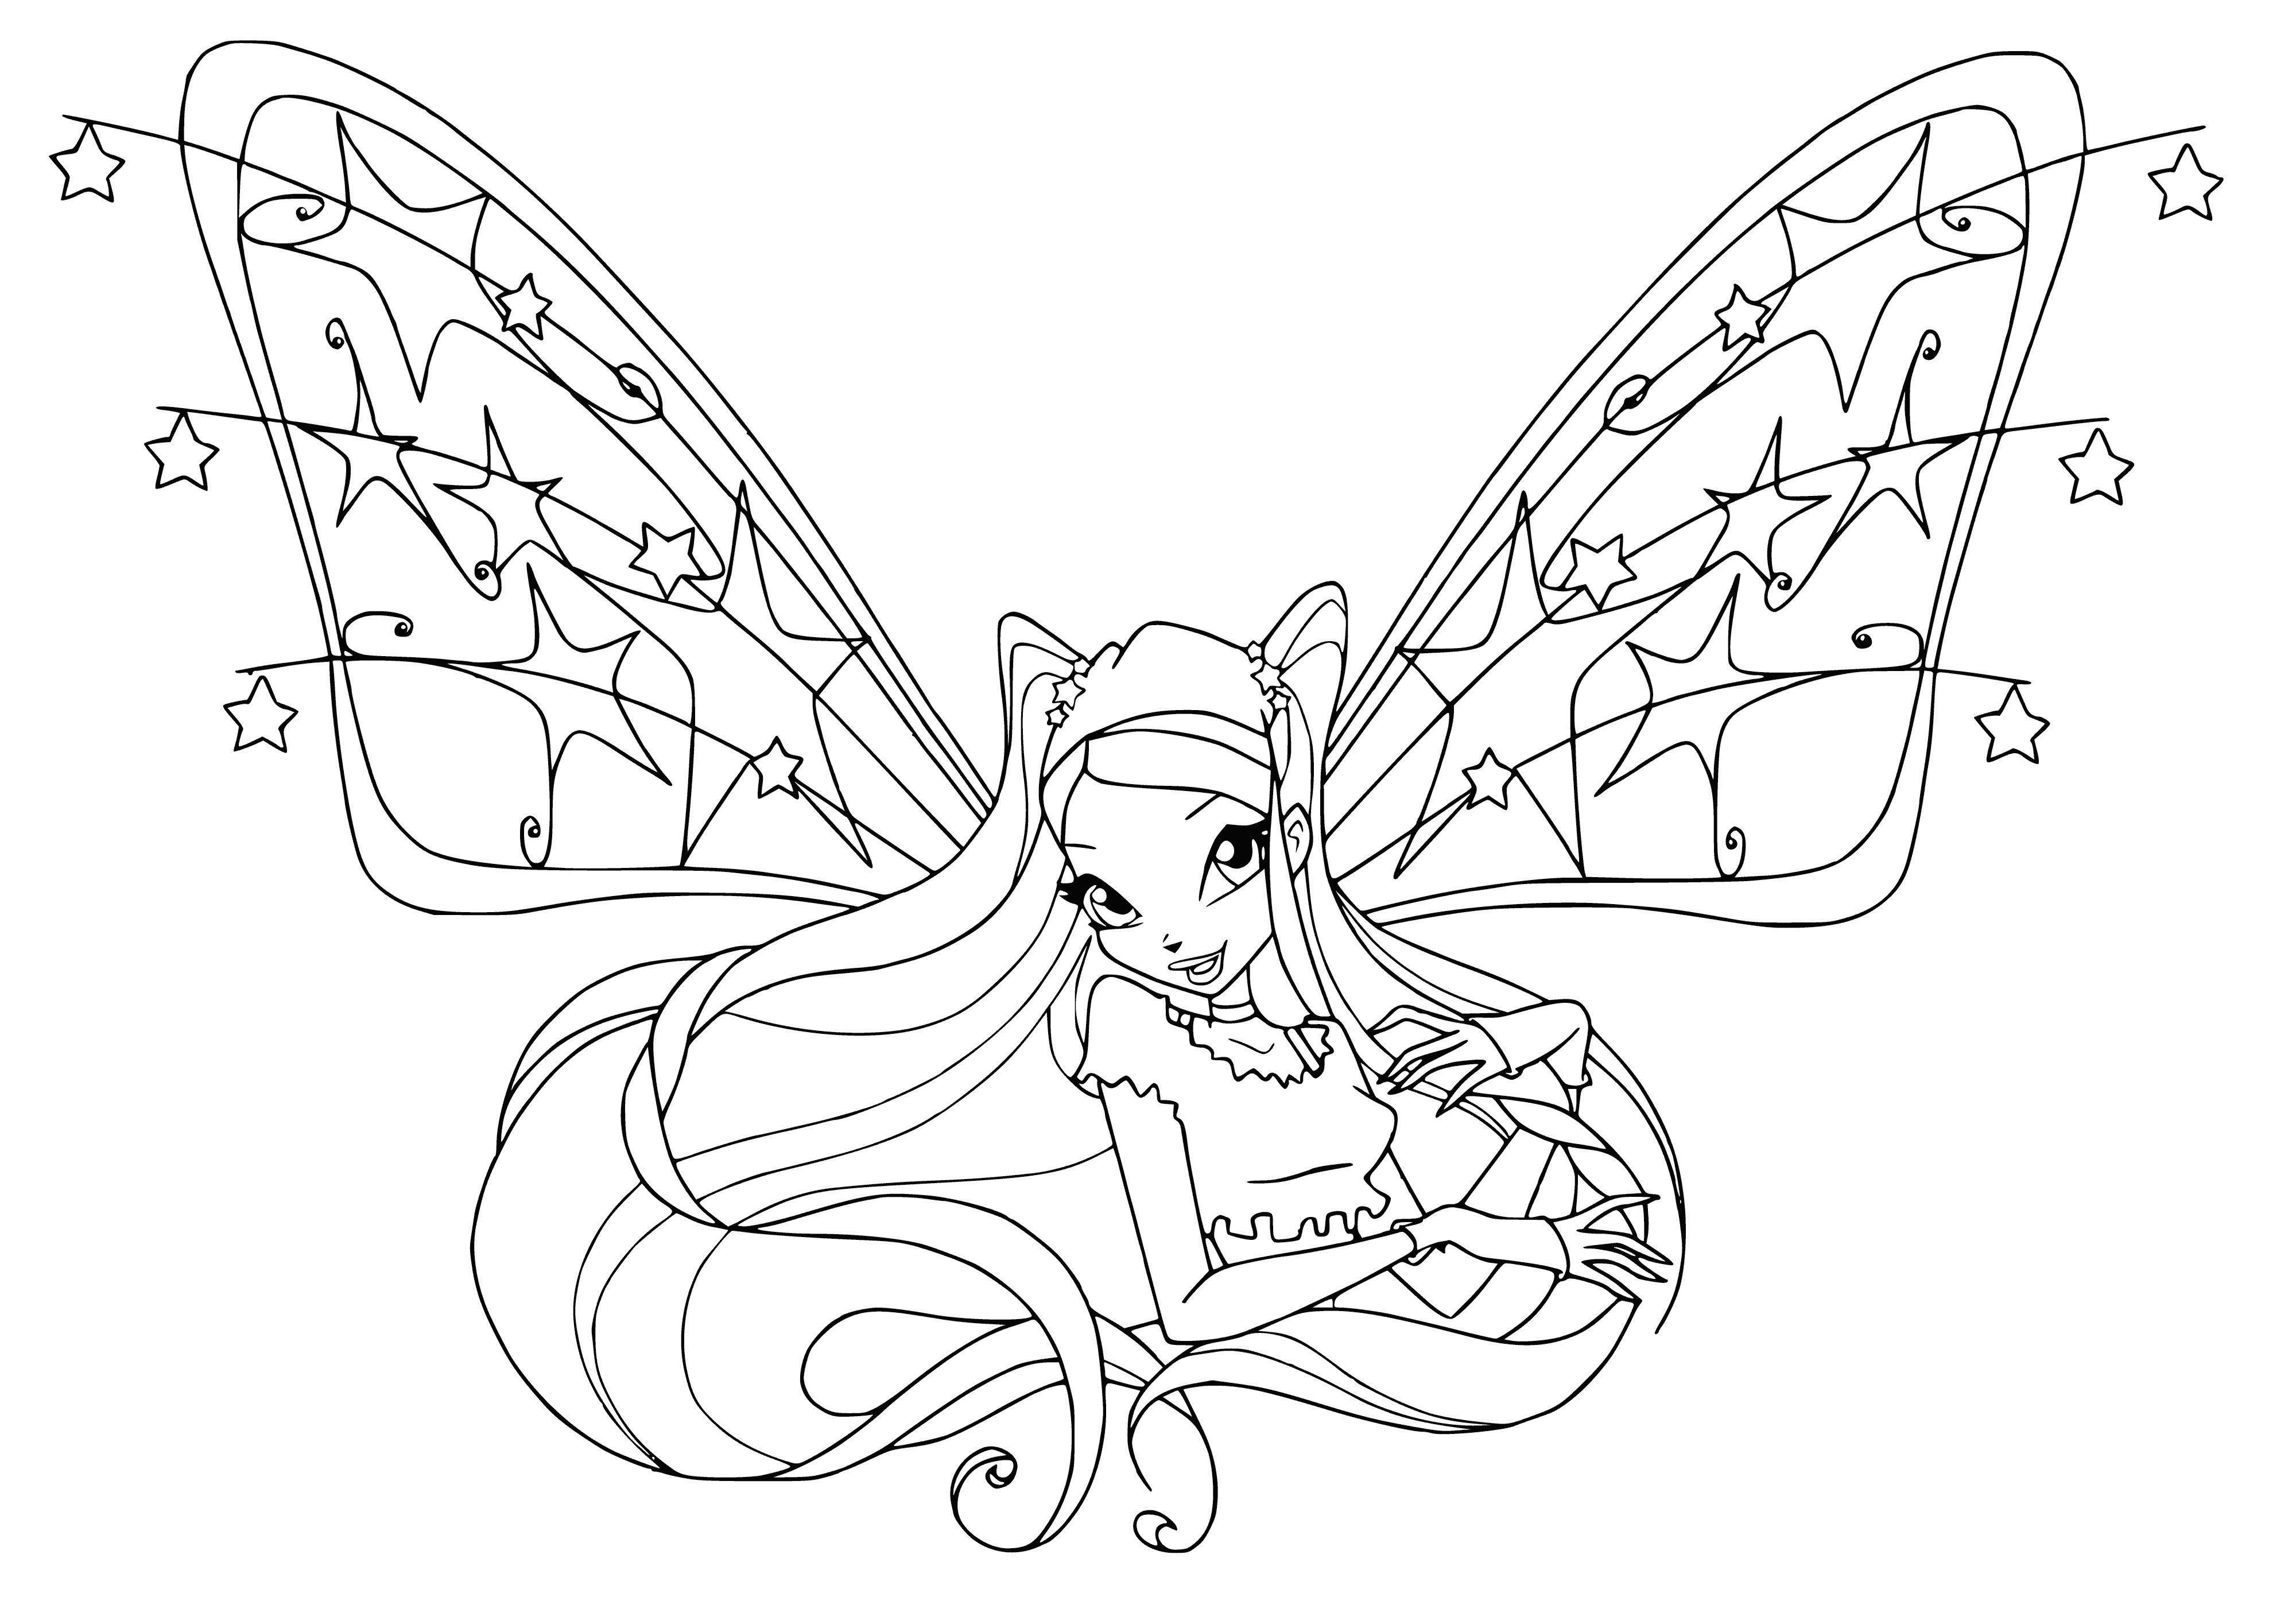 Fairy Stella is flying with her wand, surrounded by a colorful aura. #FairyStella #BelievixWand #ColoringPage